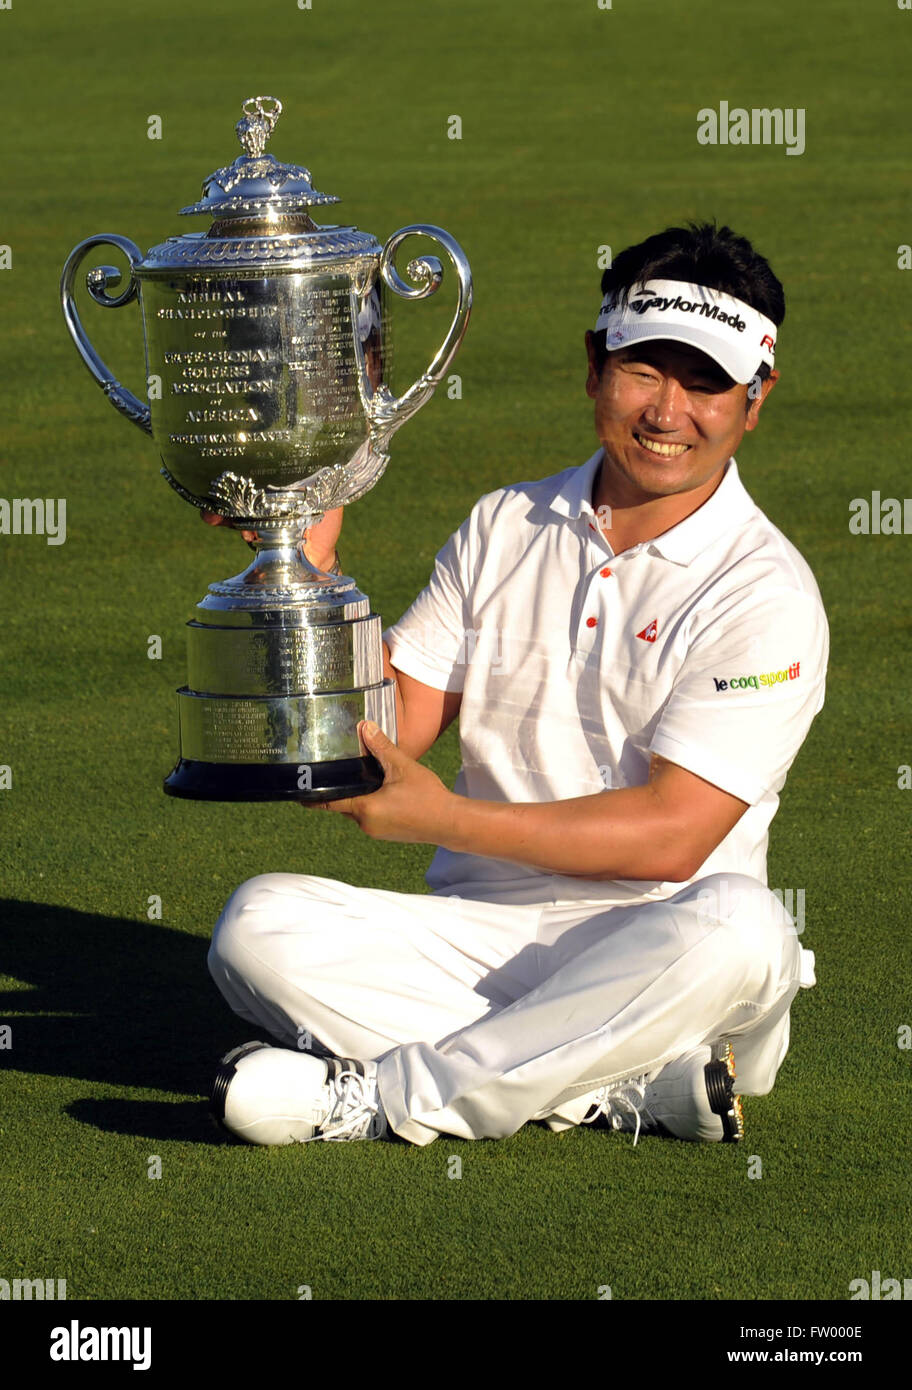 August 16, 2009 - Chaska, MN, UNITED STATES - Y.E. Yang of Korea holds the Wanamaker Trophy after winning the 2009 PGA Championship at Hazeltine National Golf Club on Aug 16, 2009 in Chaska, MN...ZUMA Press/Scott A. Miller (Credit Image: © Scott A. Miller via ZUMA Wire) Stock Photo